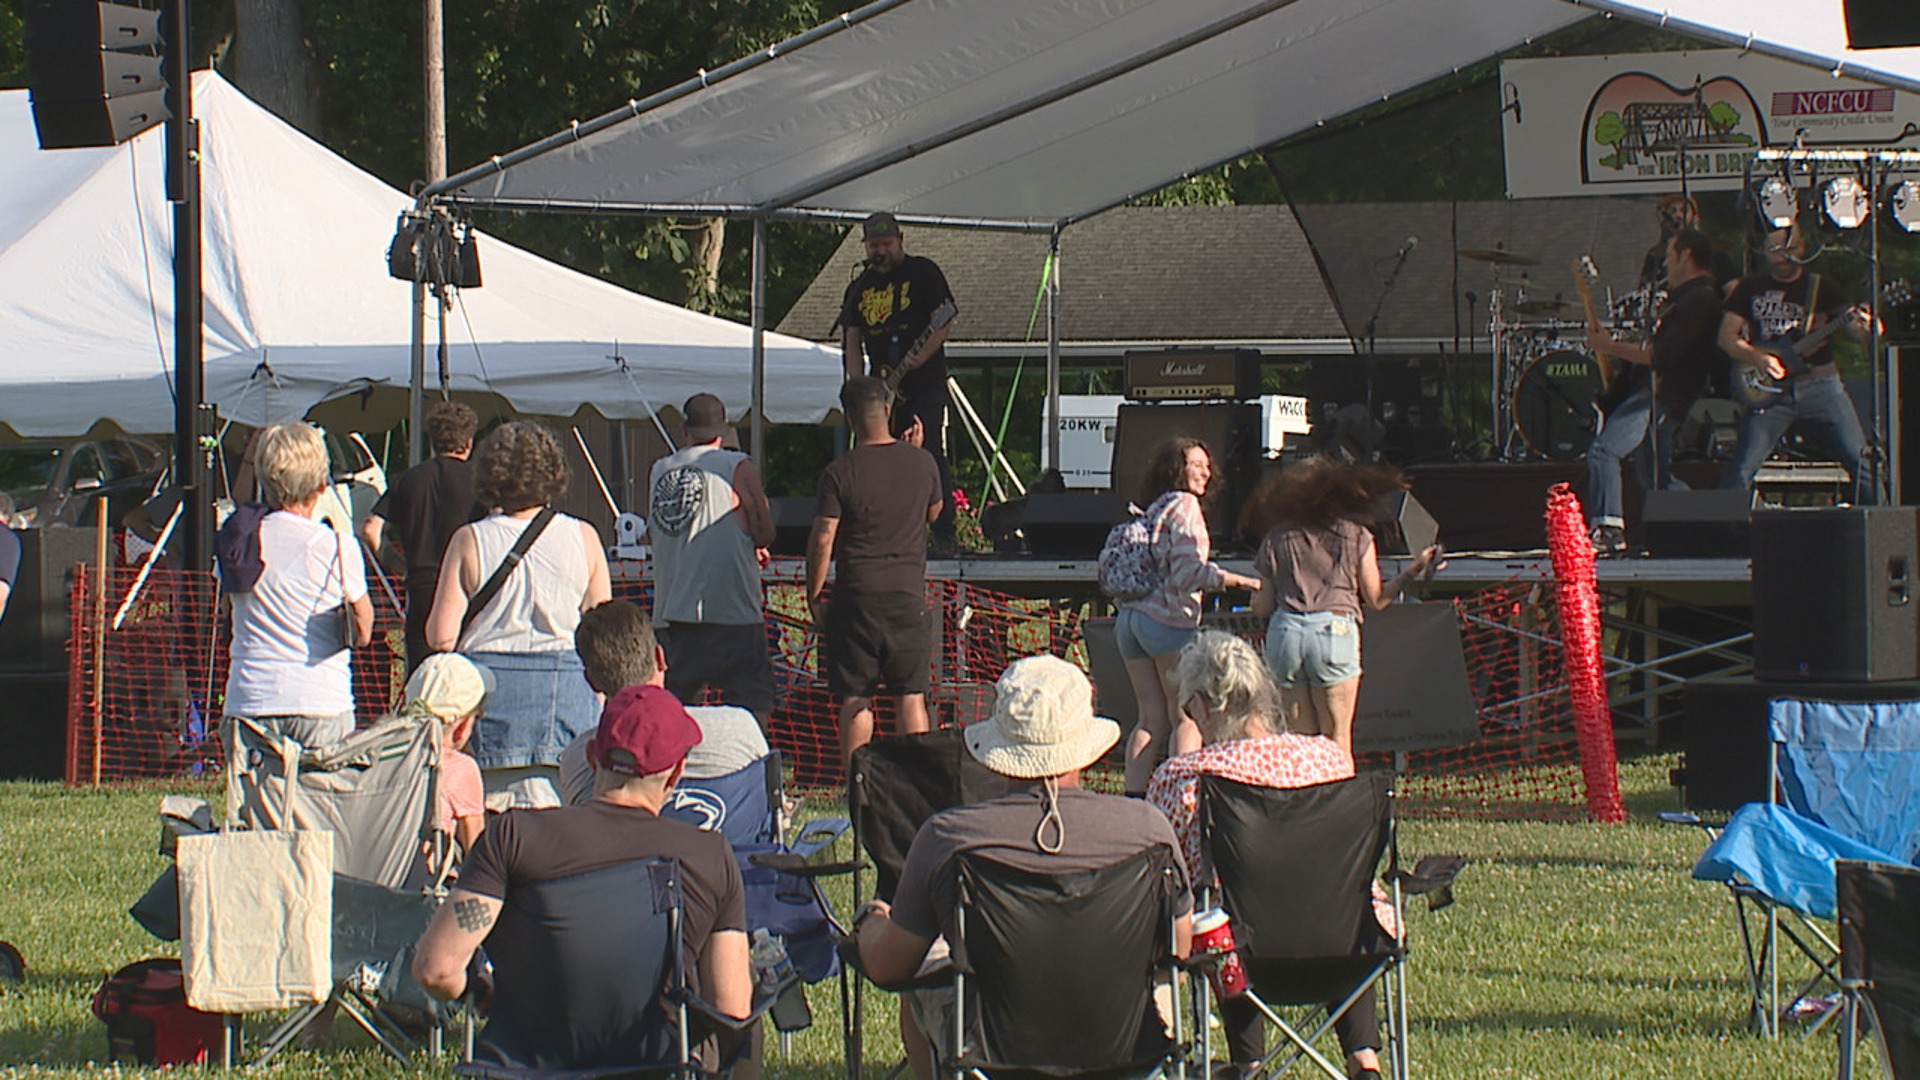 Iron Bridge Music Festival is in full swing after kicking off at New Cumberland Borough Park on Friday.